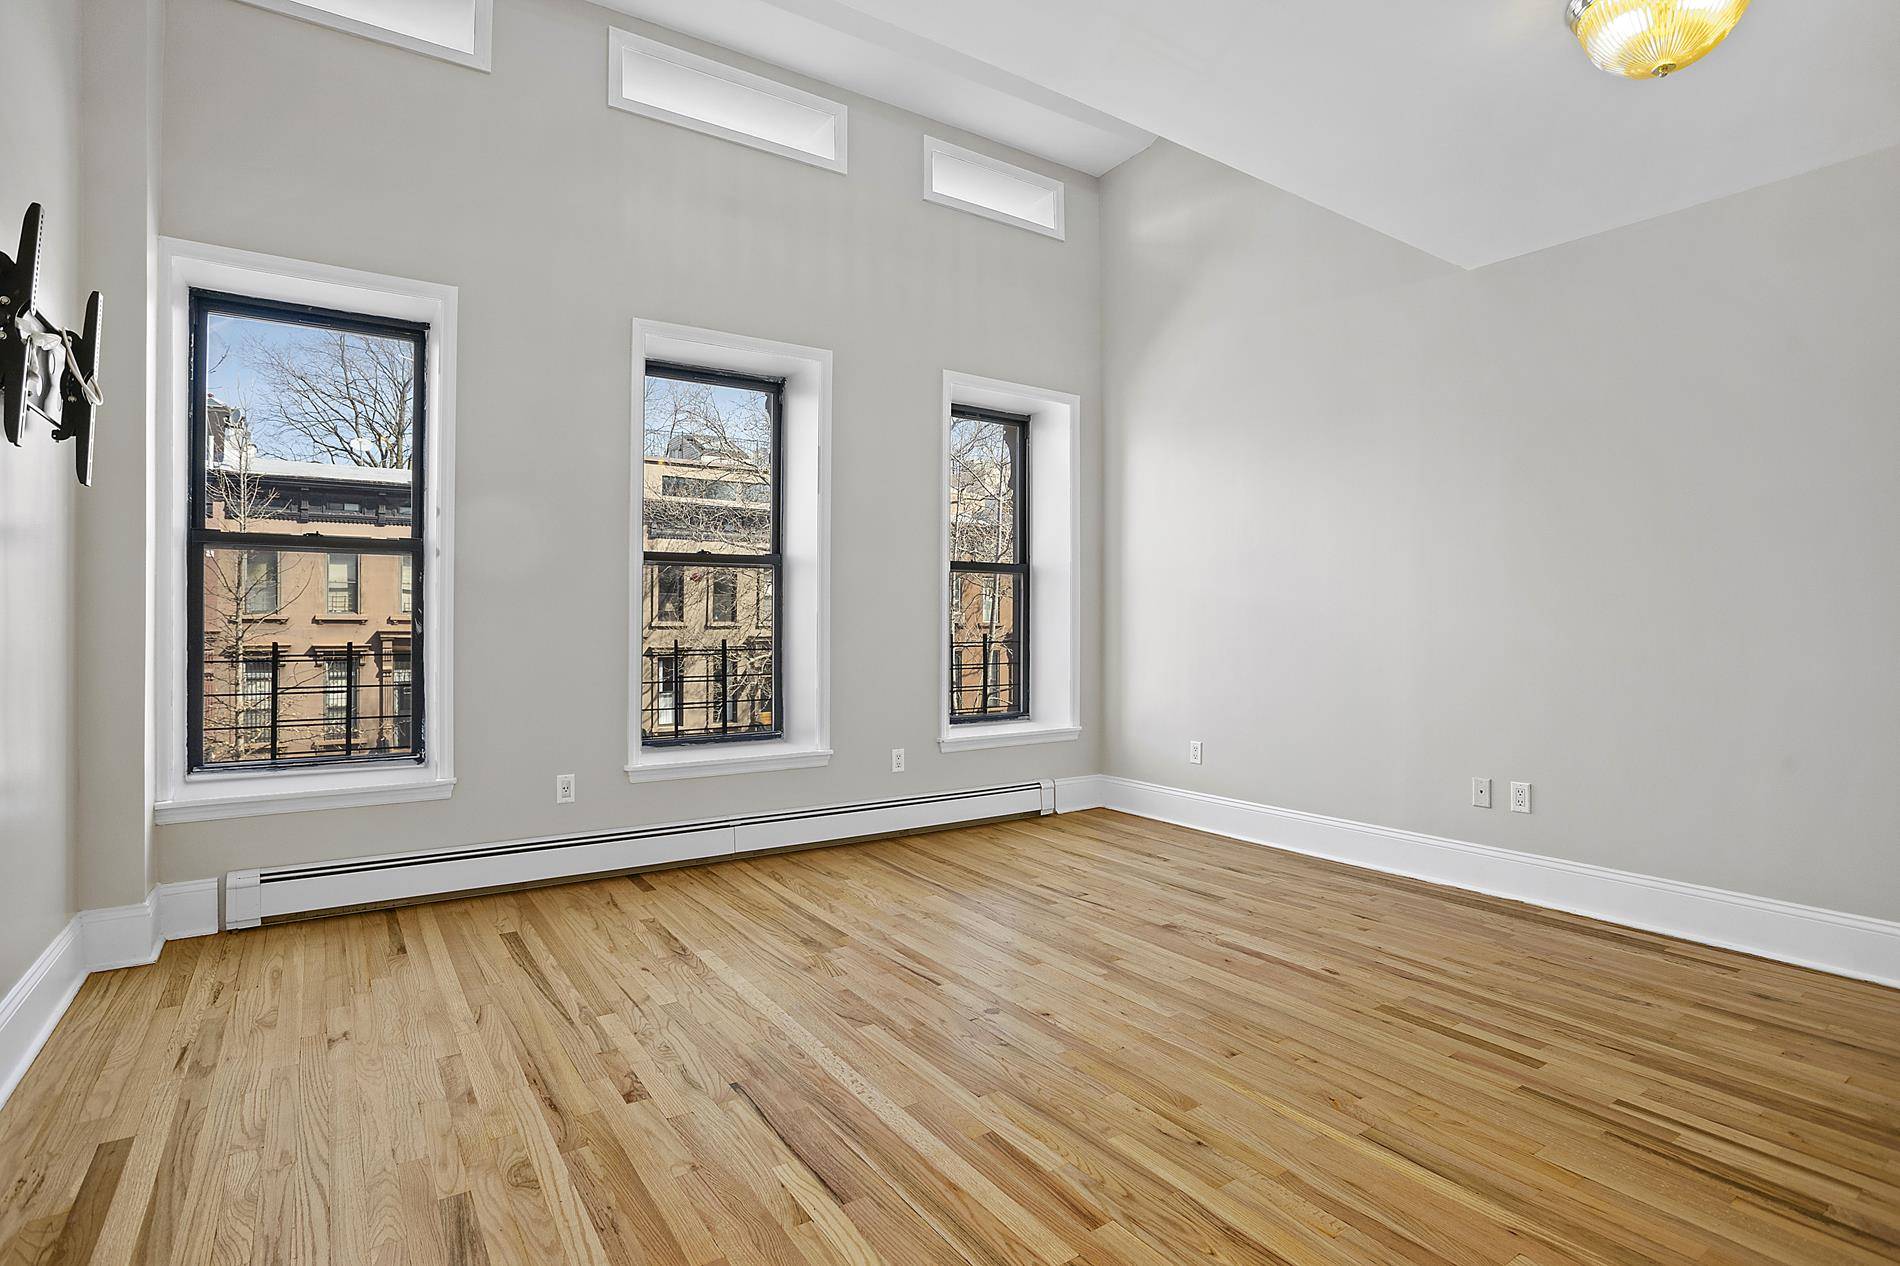 Open and airy upper duplex two bedroom loft style apartment in a modern brownstone located on the axis of Bed Stuy and Bushwick.